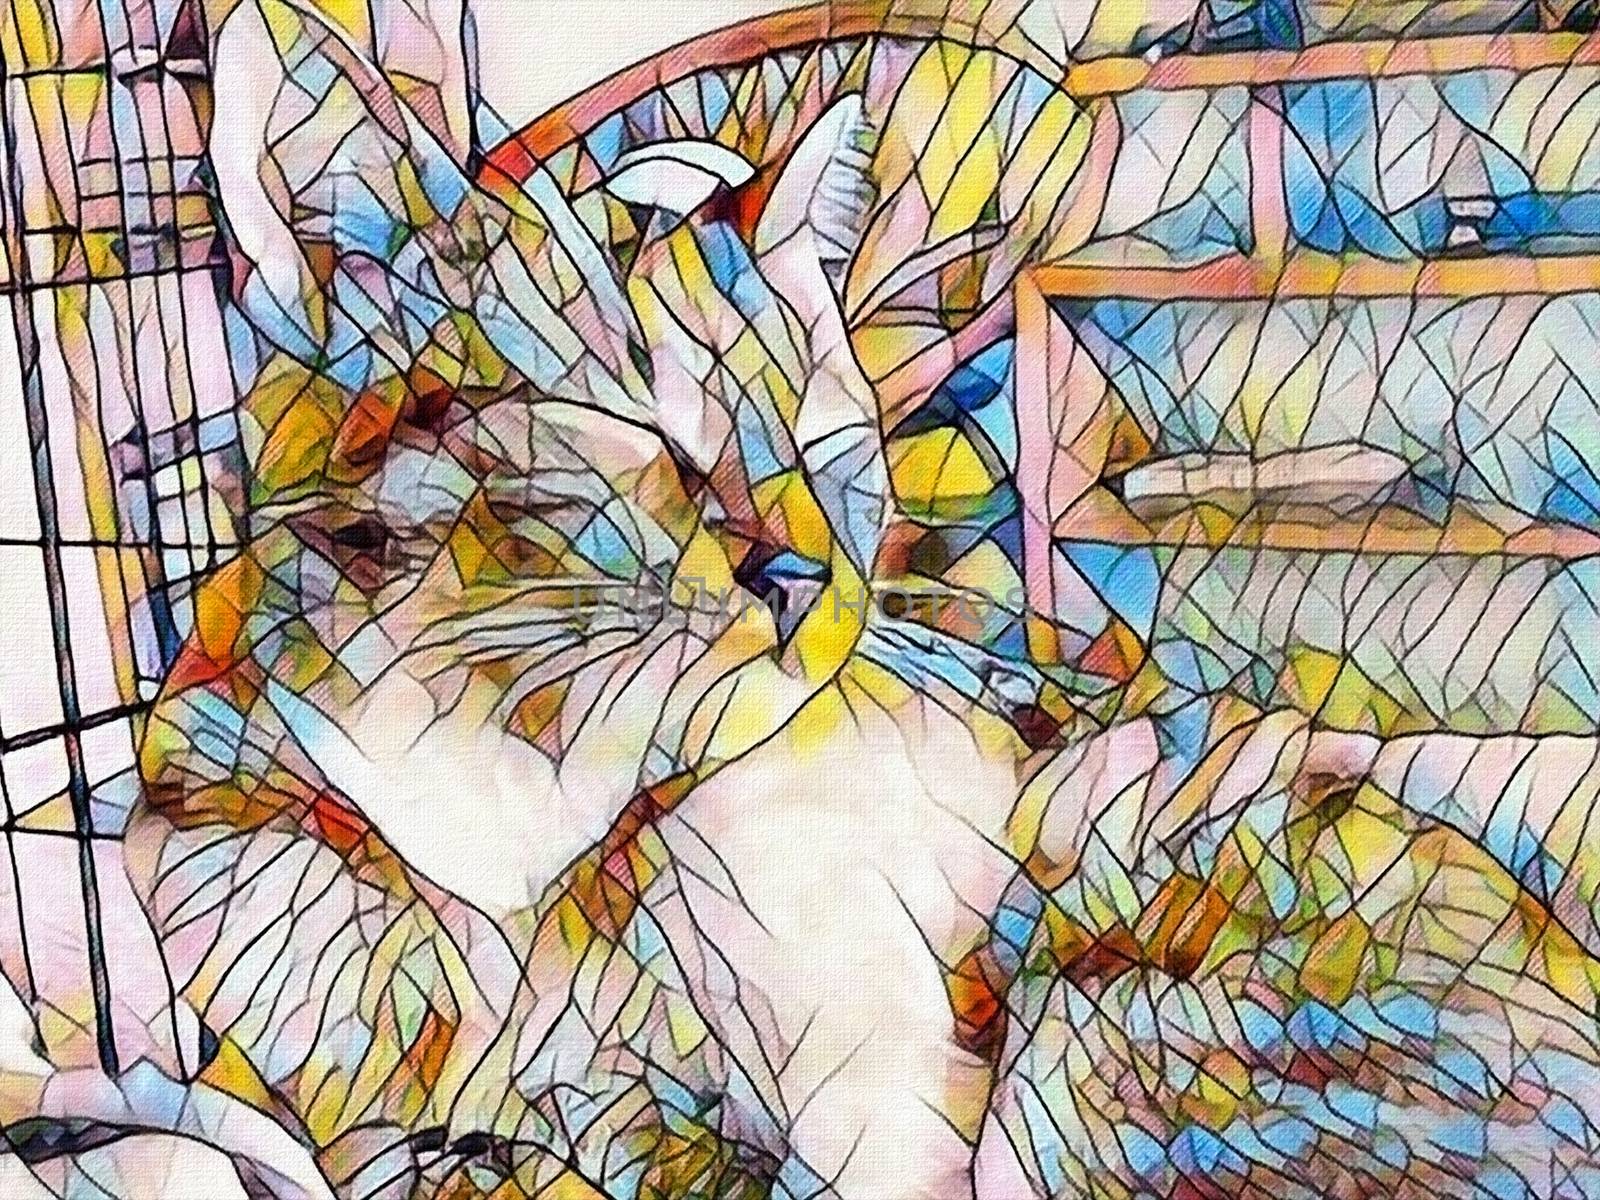 Abstract Painting. Sleeping cat